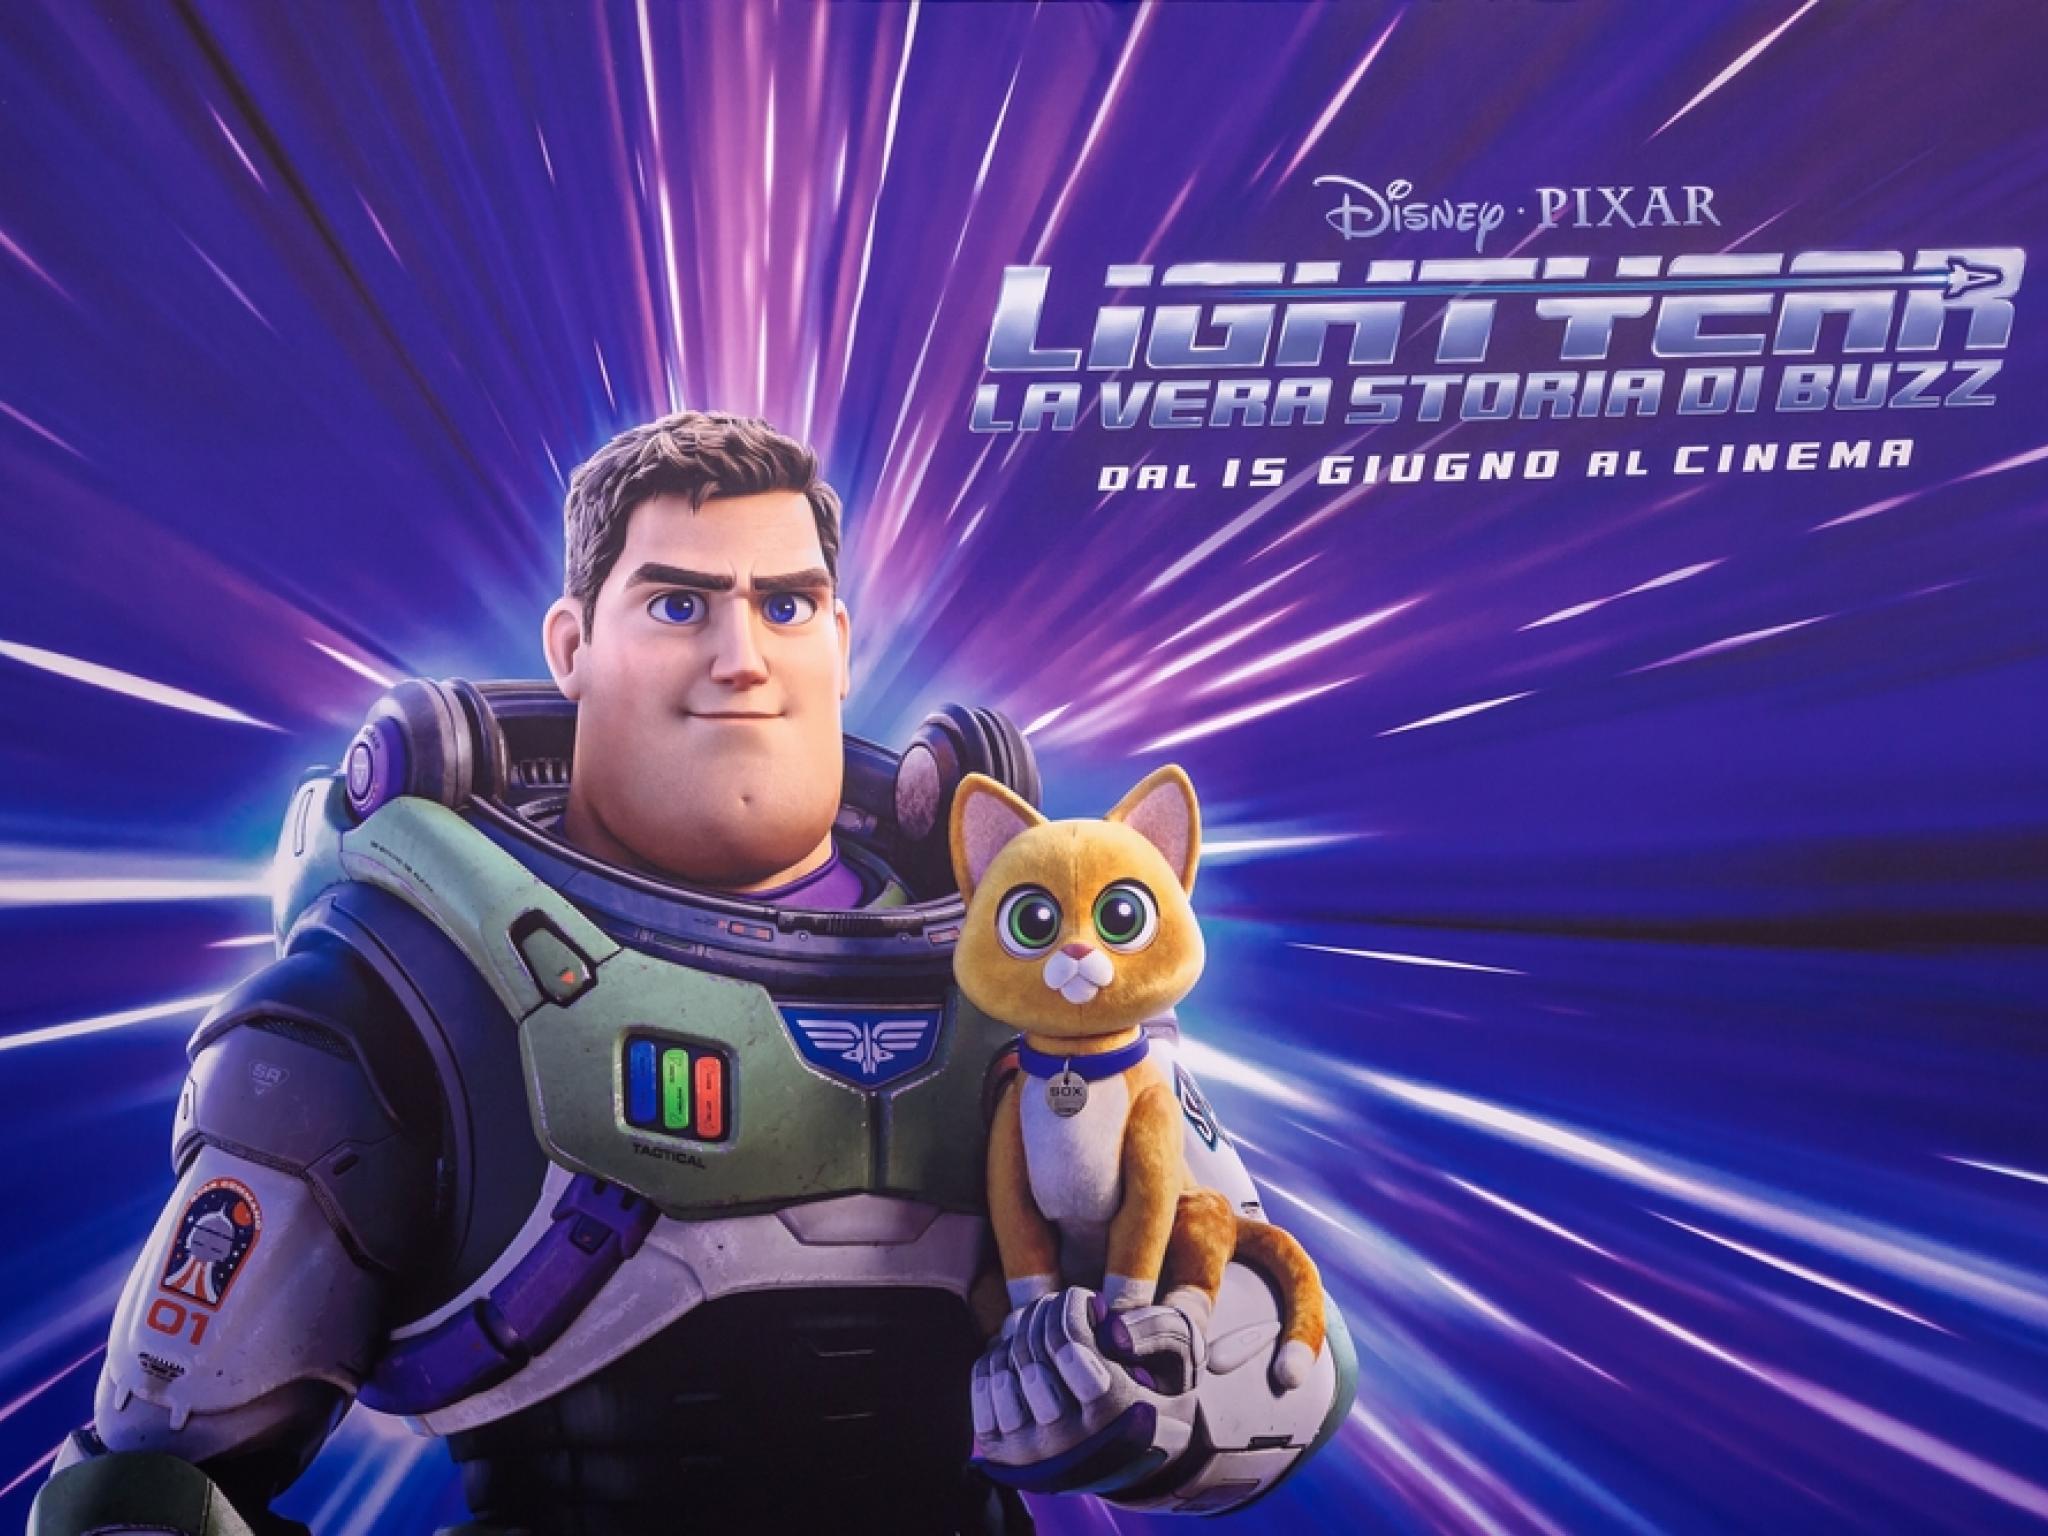  did-disney-remove-the-controversial-lightyear-from-its-library-heres-what-really-happened 